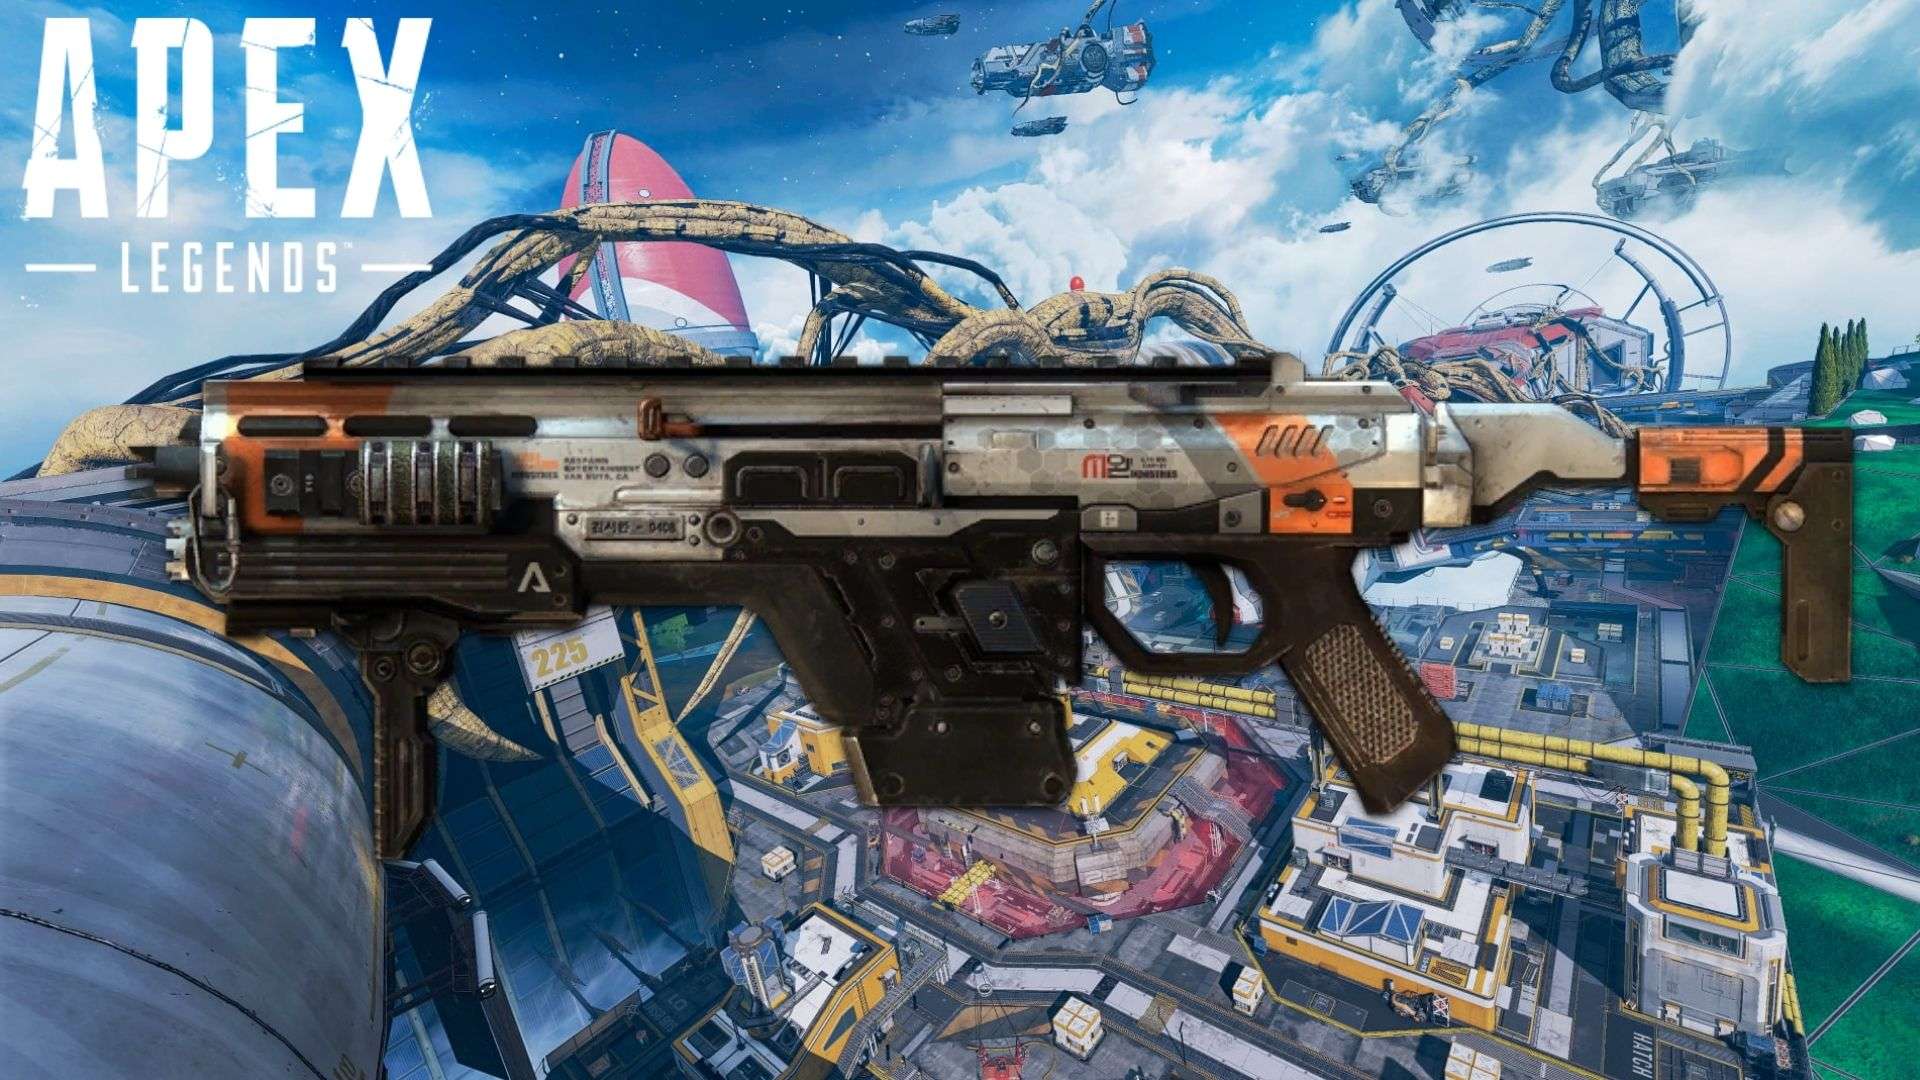 CAR SMG in Apex Legends Olympus map